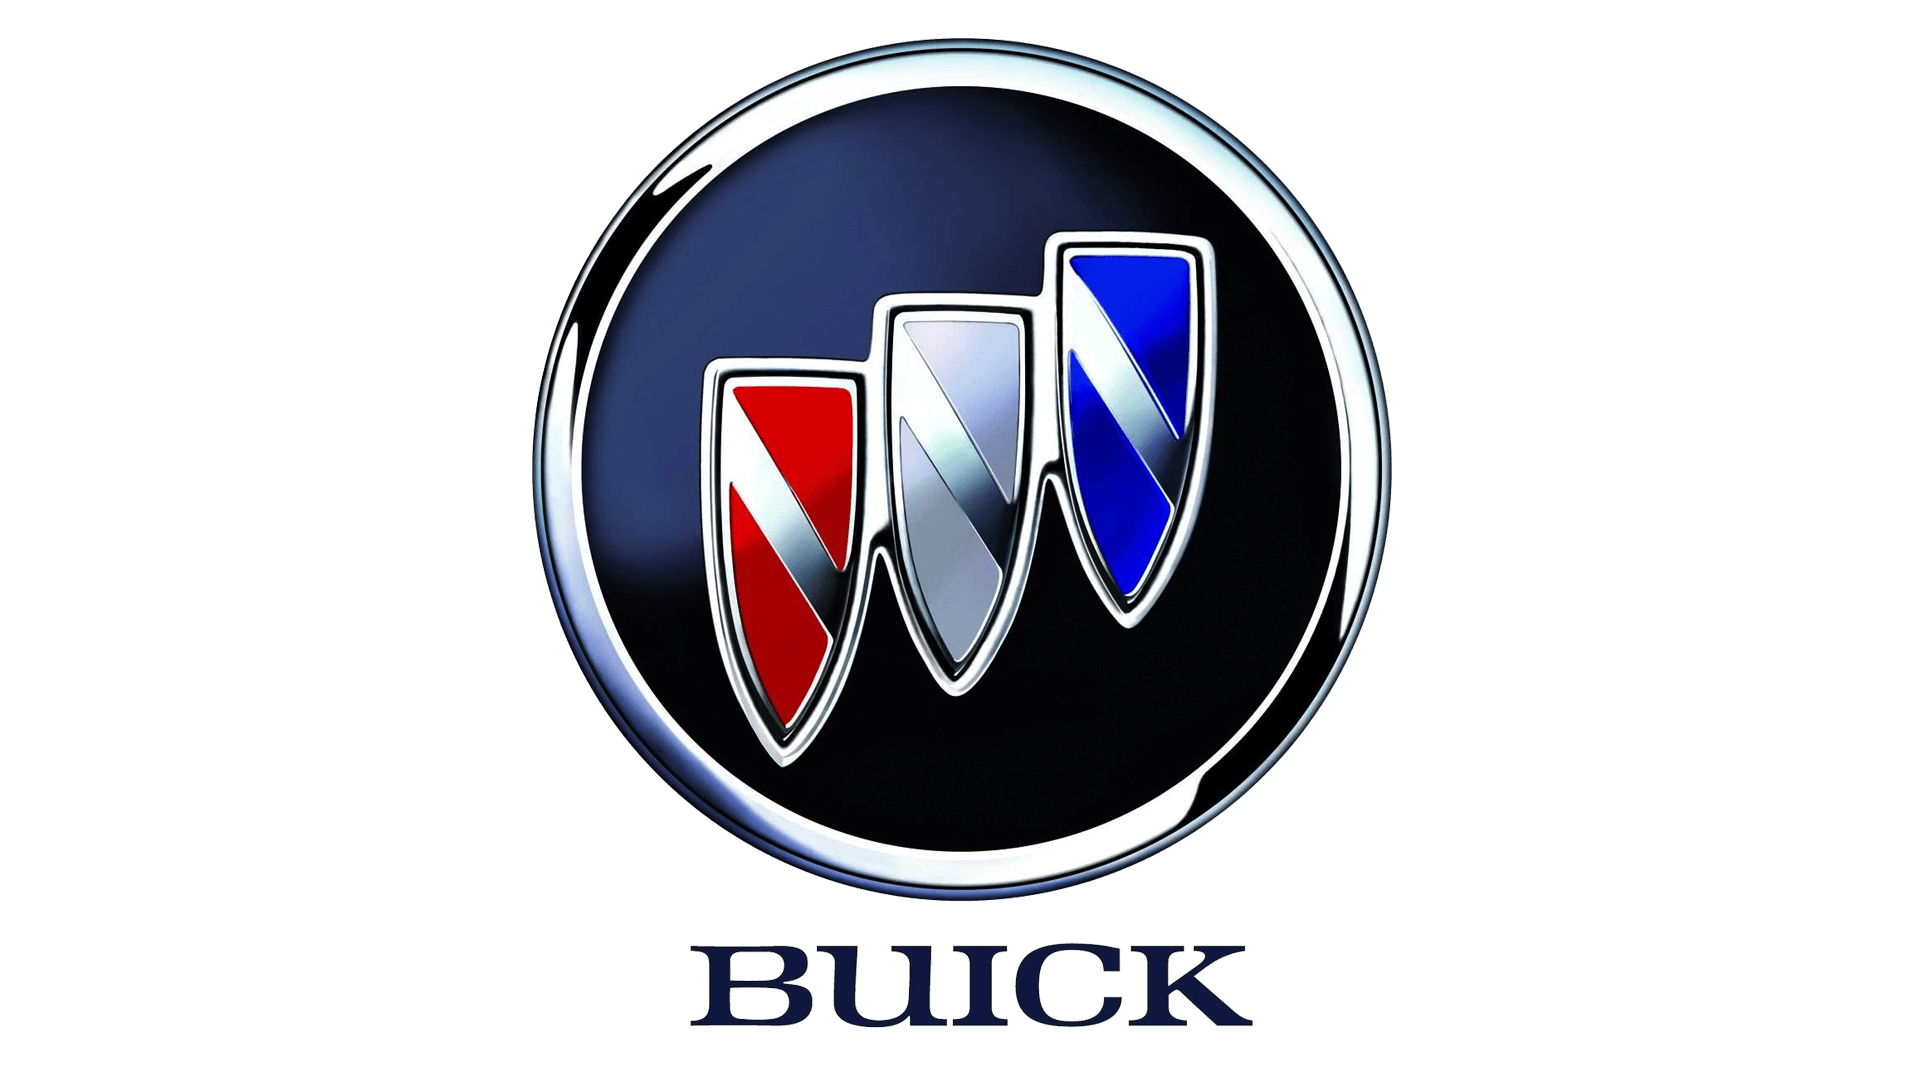 Buick Tri Shield Logo - Buick Logo, HD Png, Meaning, Information